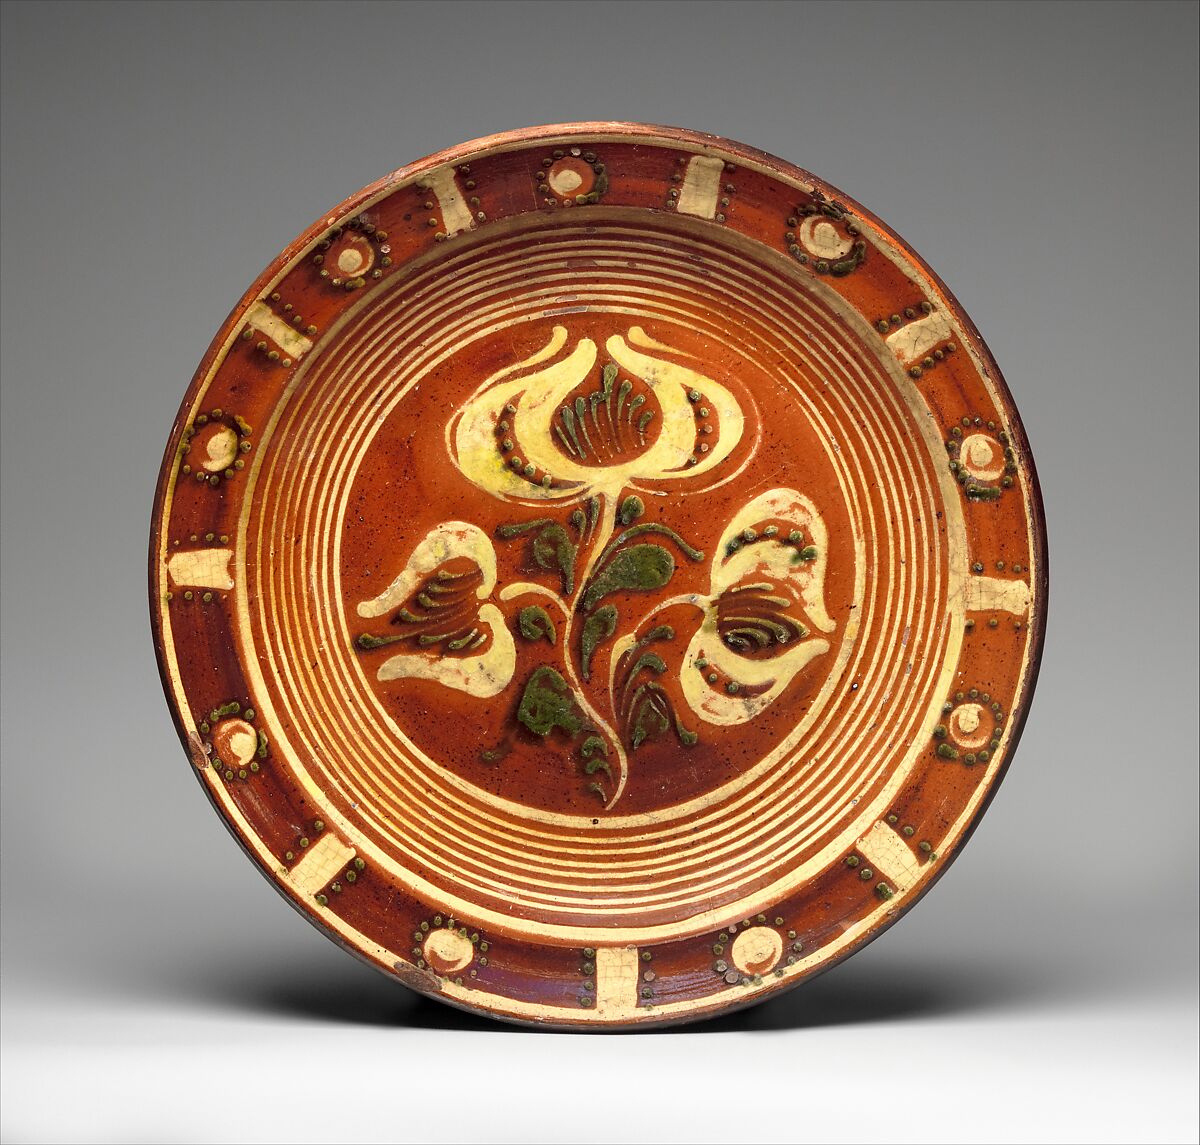 Redware Slip-decorated dish, Attributed to Dennis Family Potters, Red earthenware 